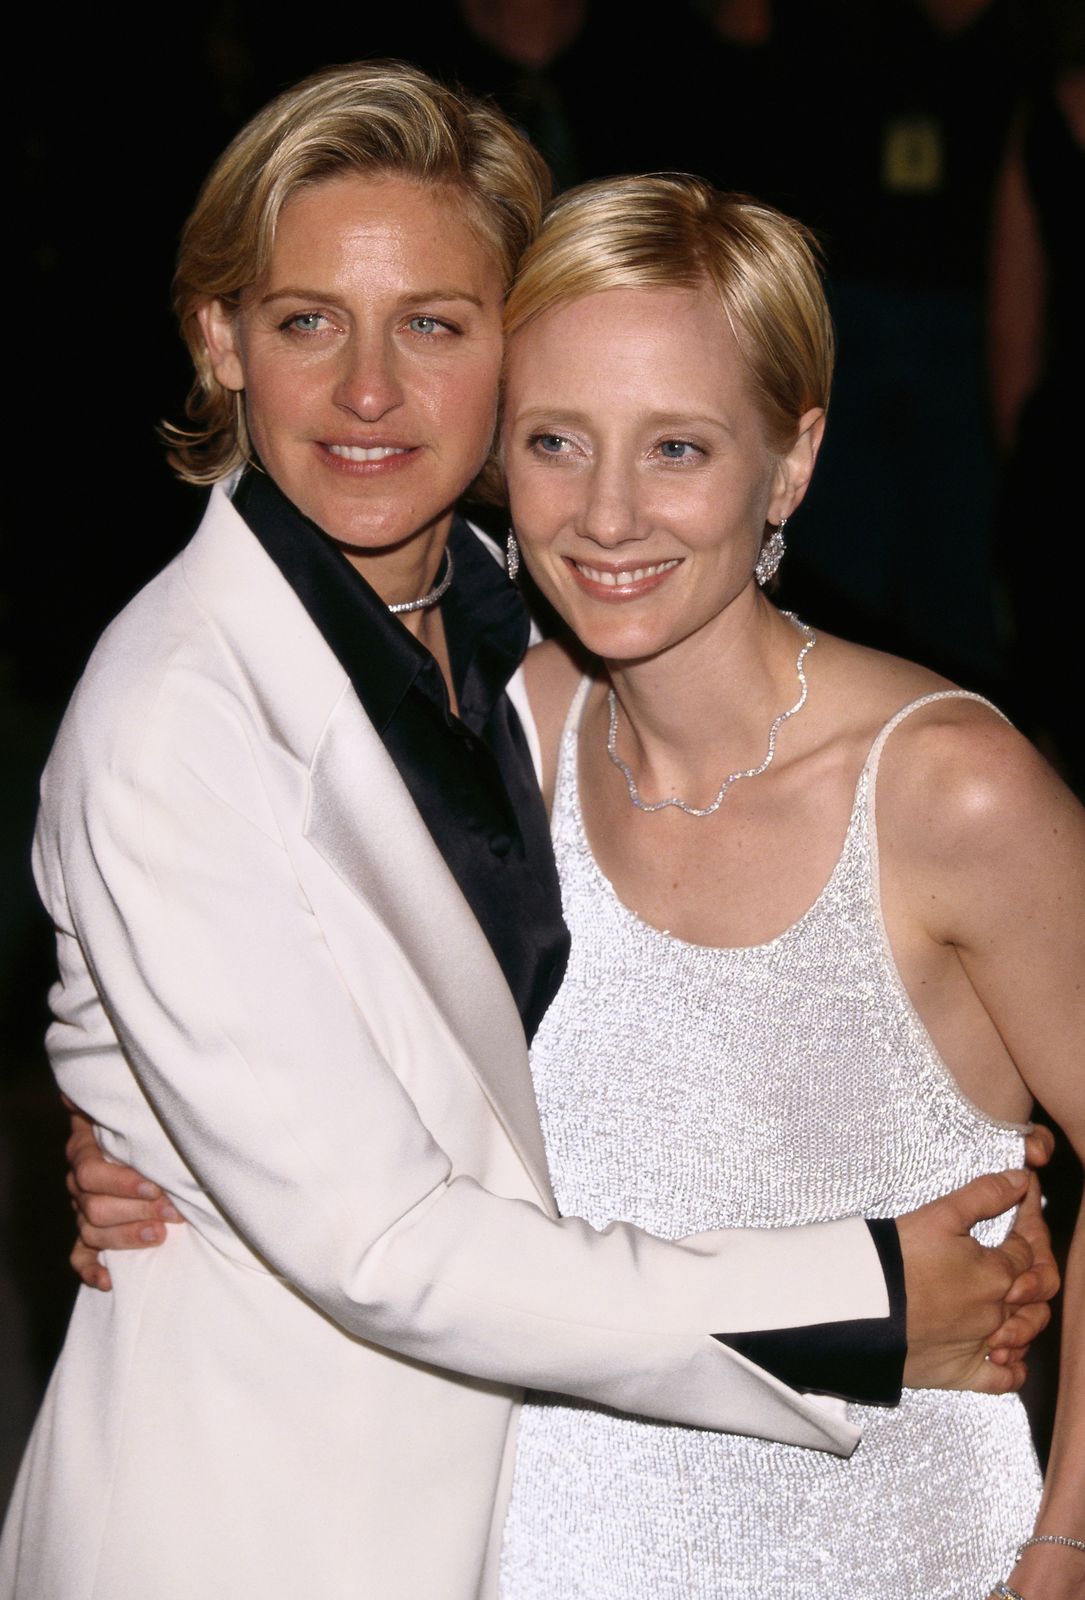 Ellen DeGeneres and Anne Heche at the 71st Annual Academy Awards - Elton John AIDS Foundation Party, 1999 | Photo: Getty Images